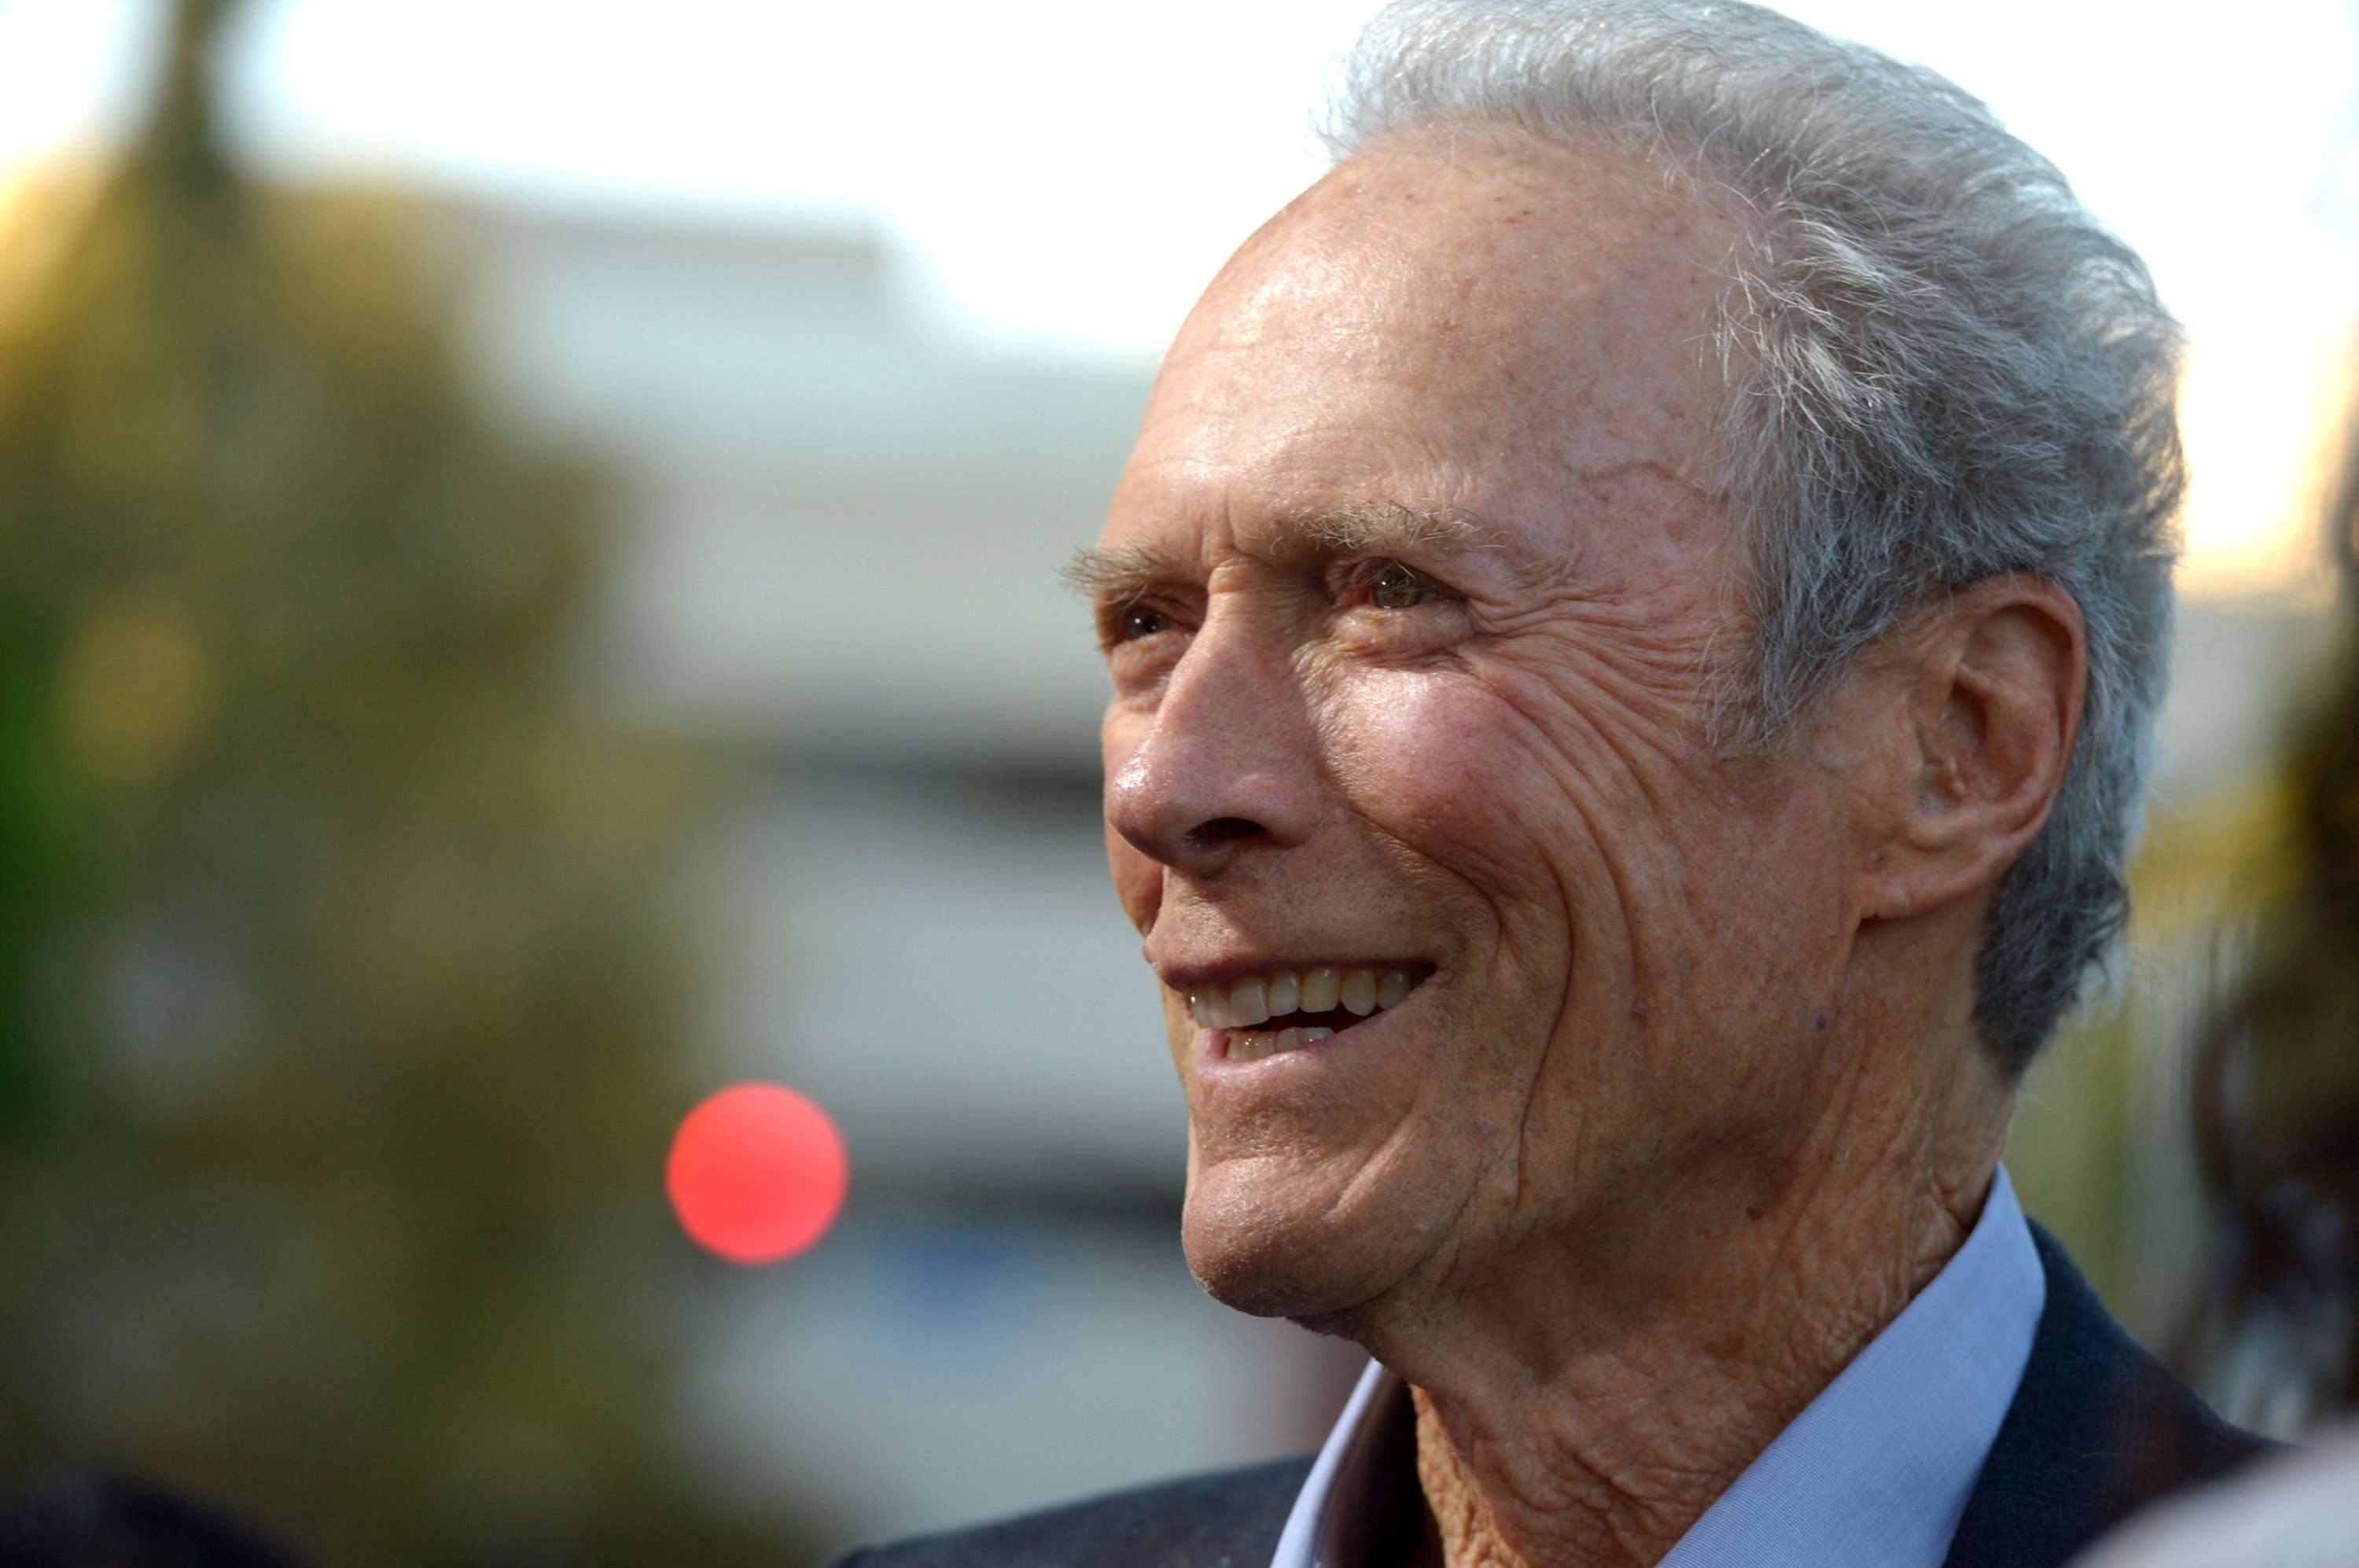 Actor-producer Clint Eastwood arrives at Warner Bros. Pictures' 'Trouble With The Curve' premiere at Regency Village Theatre in Westwood, California, U.S, Sept. 19, 2012. (Photo by KEVIN WINTER / GETTY IMAGES NORTH AMERICA via AFP)